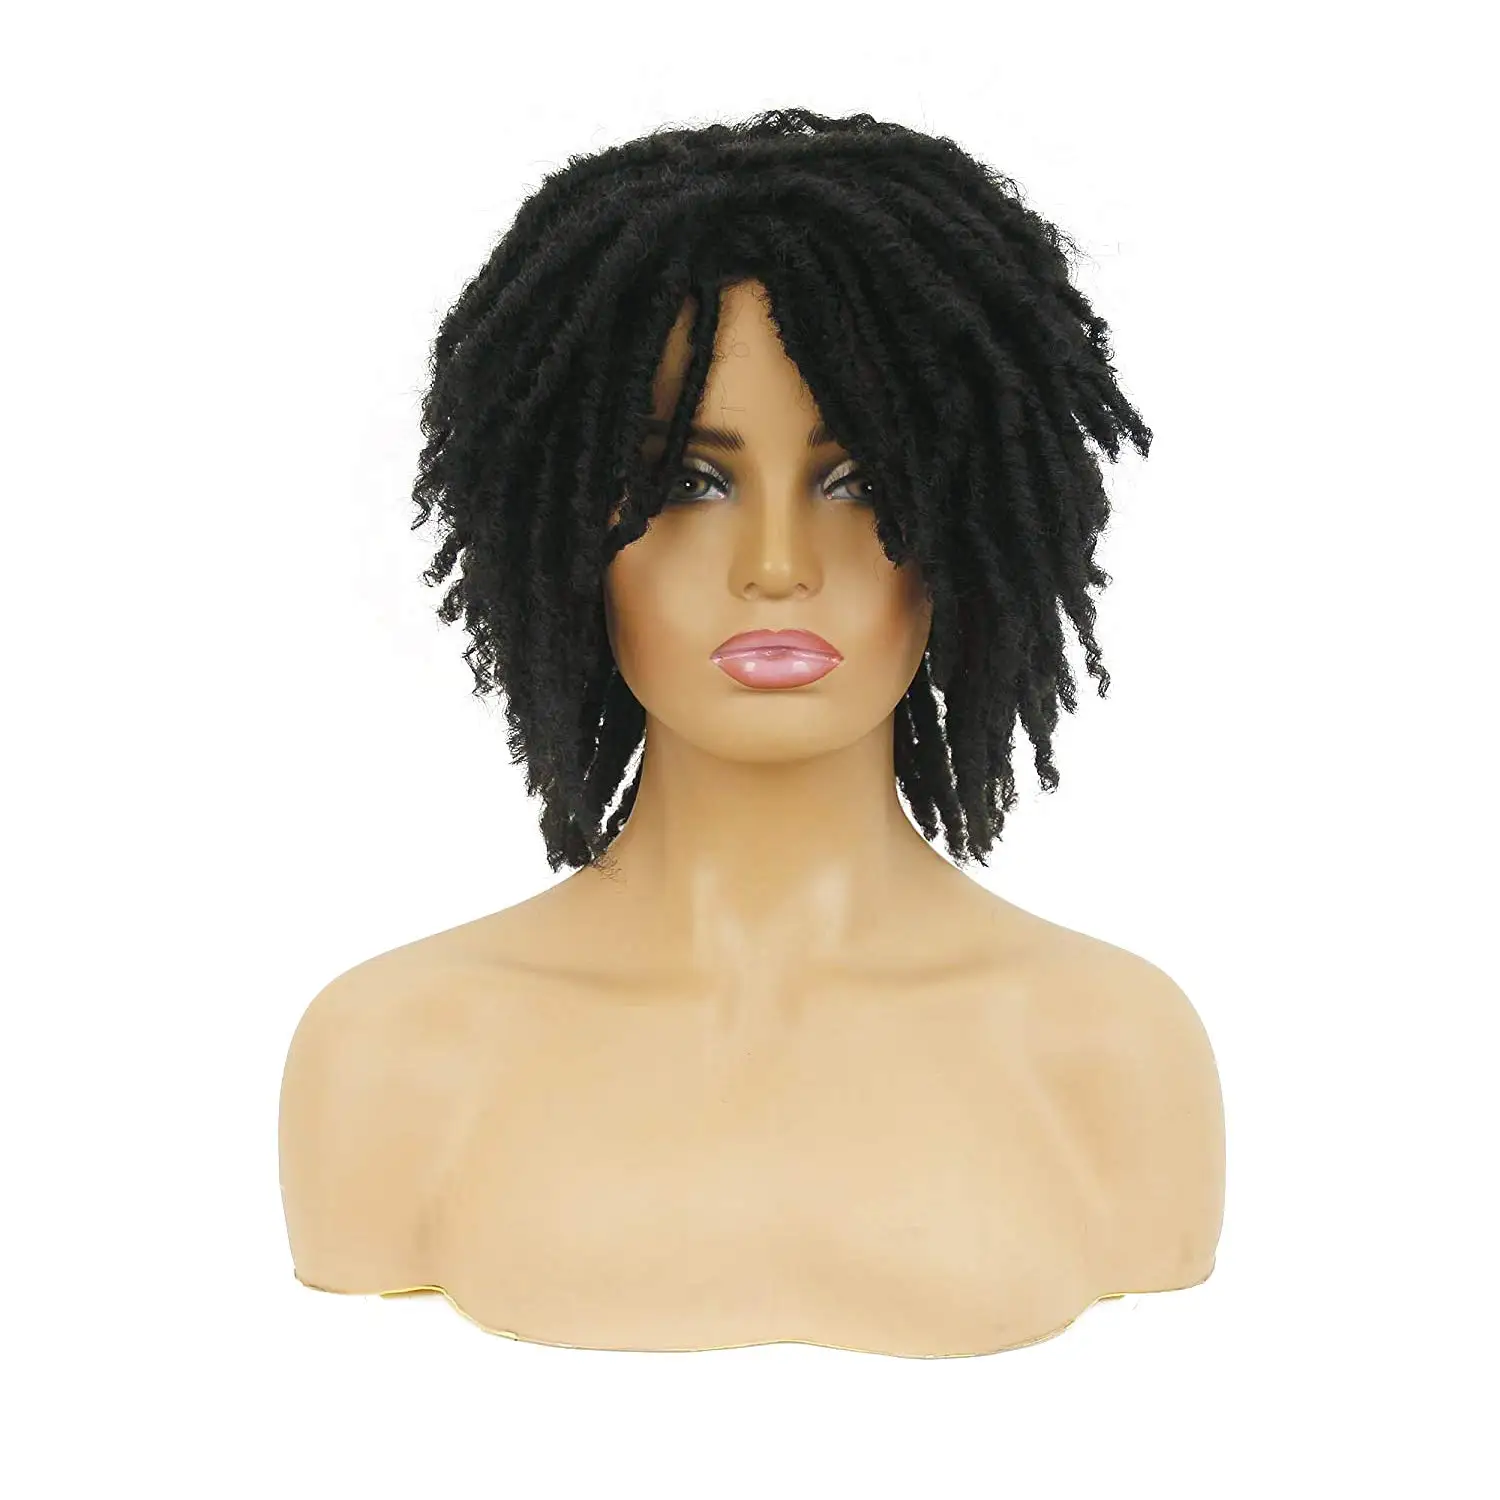 

Short Soft Dreadlock Synthetic Wigs For Black Women Afro Kinky Curly Hair With Bangs Ombre Brown Crochet Twist Hair